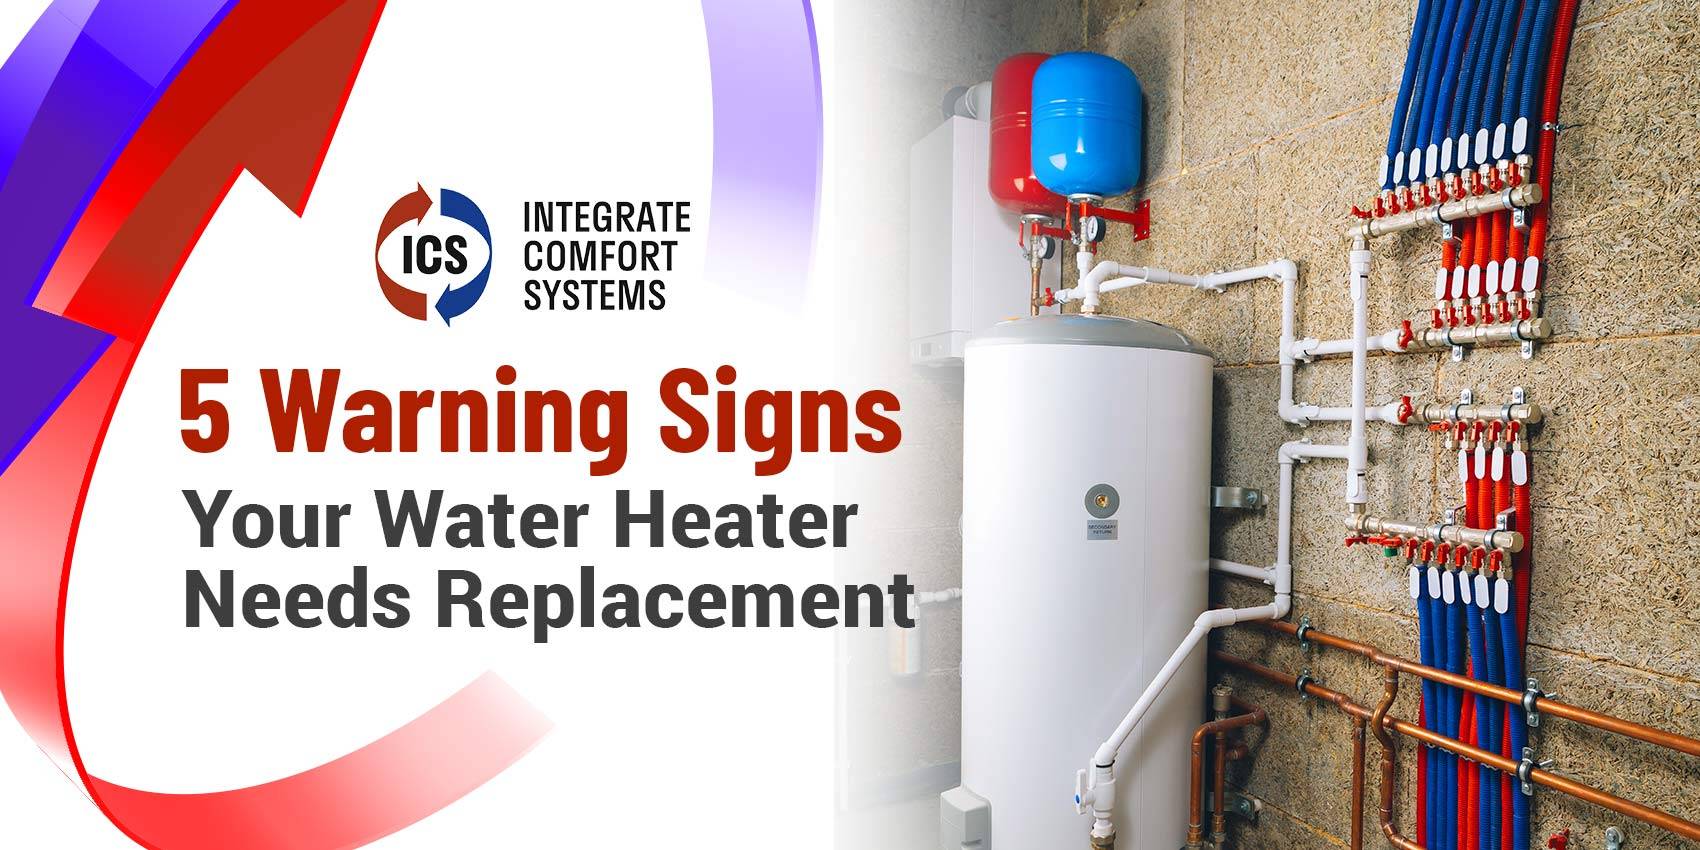 5 Warning Signs Your Water Heater Needs Replacement